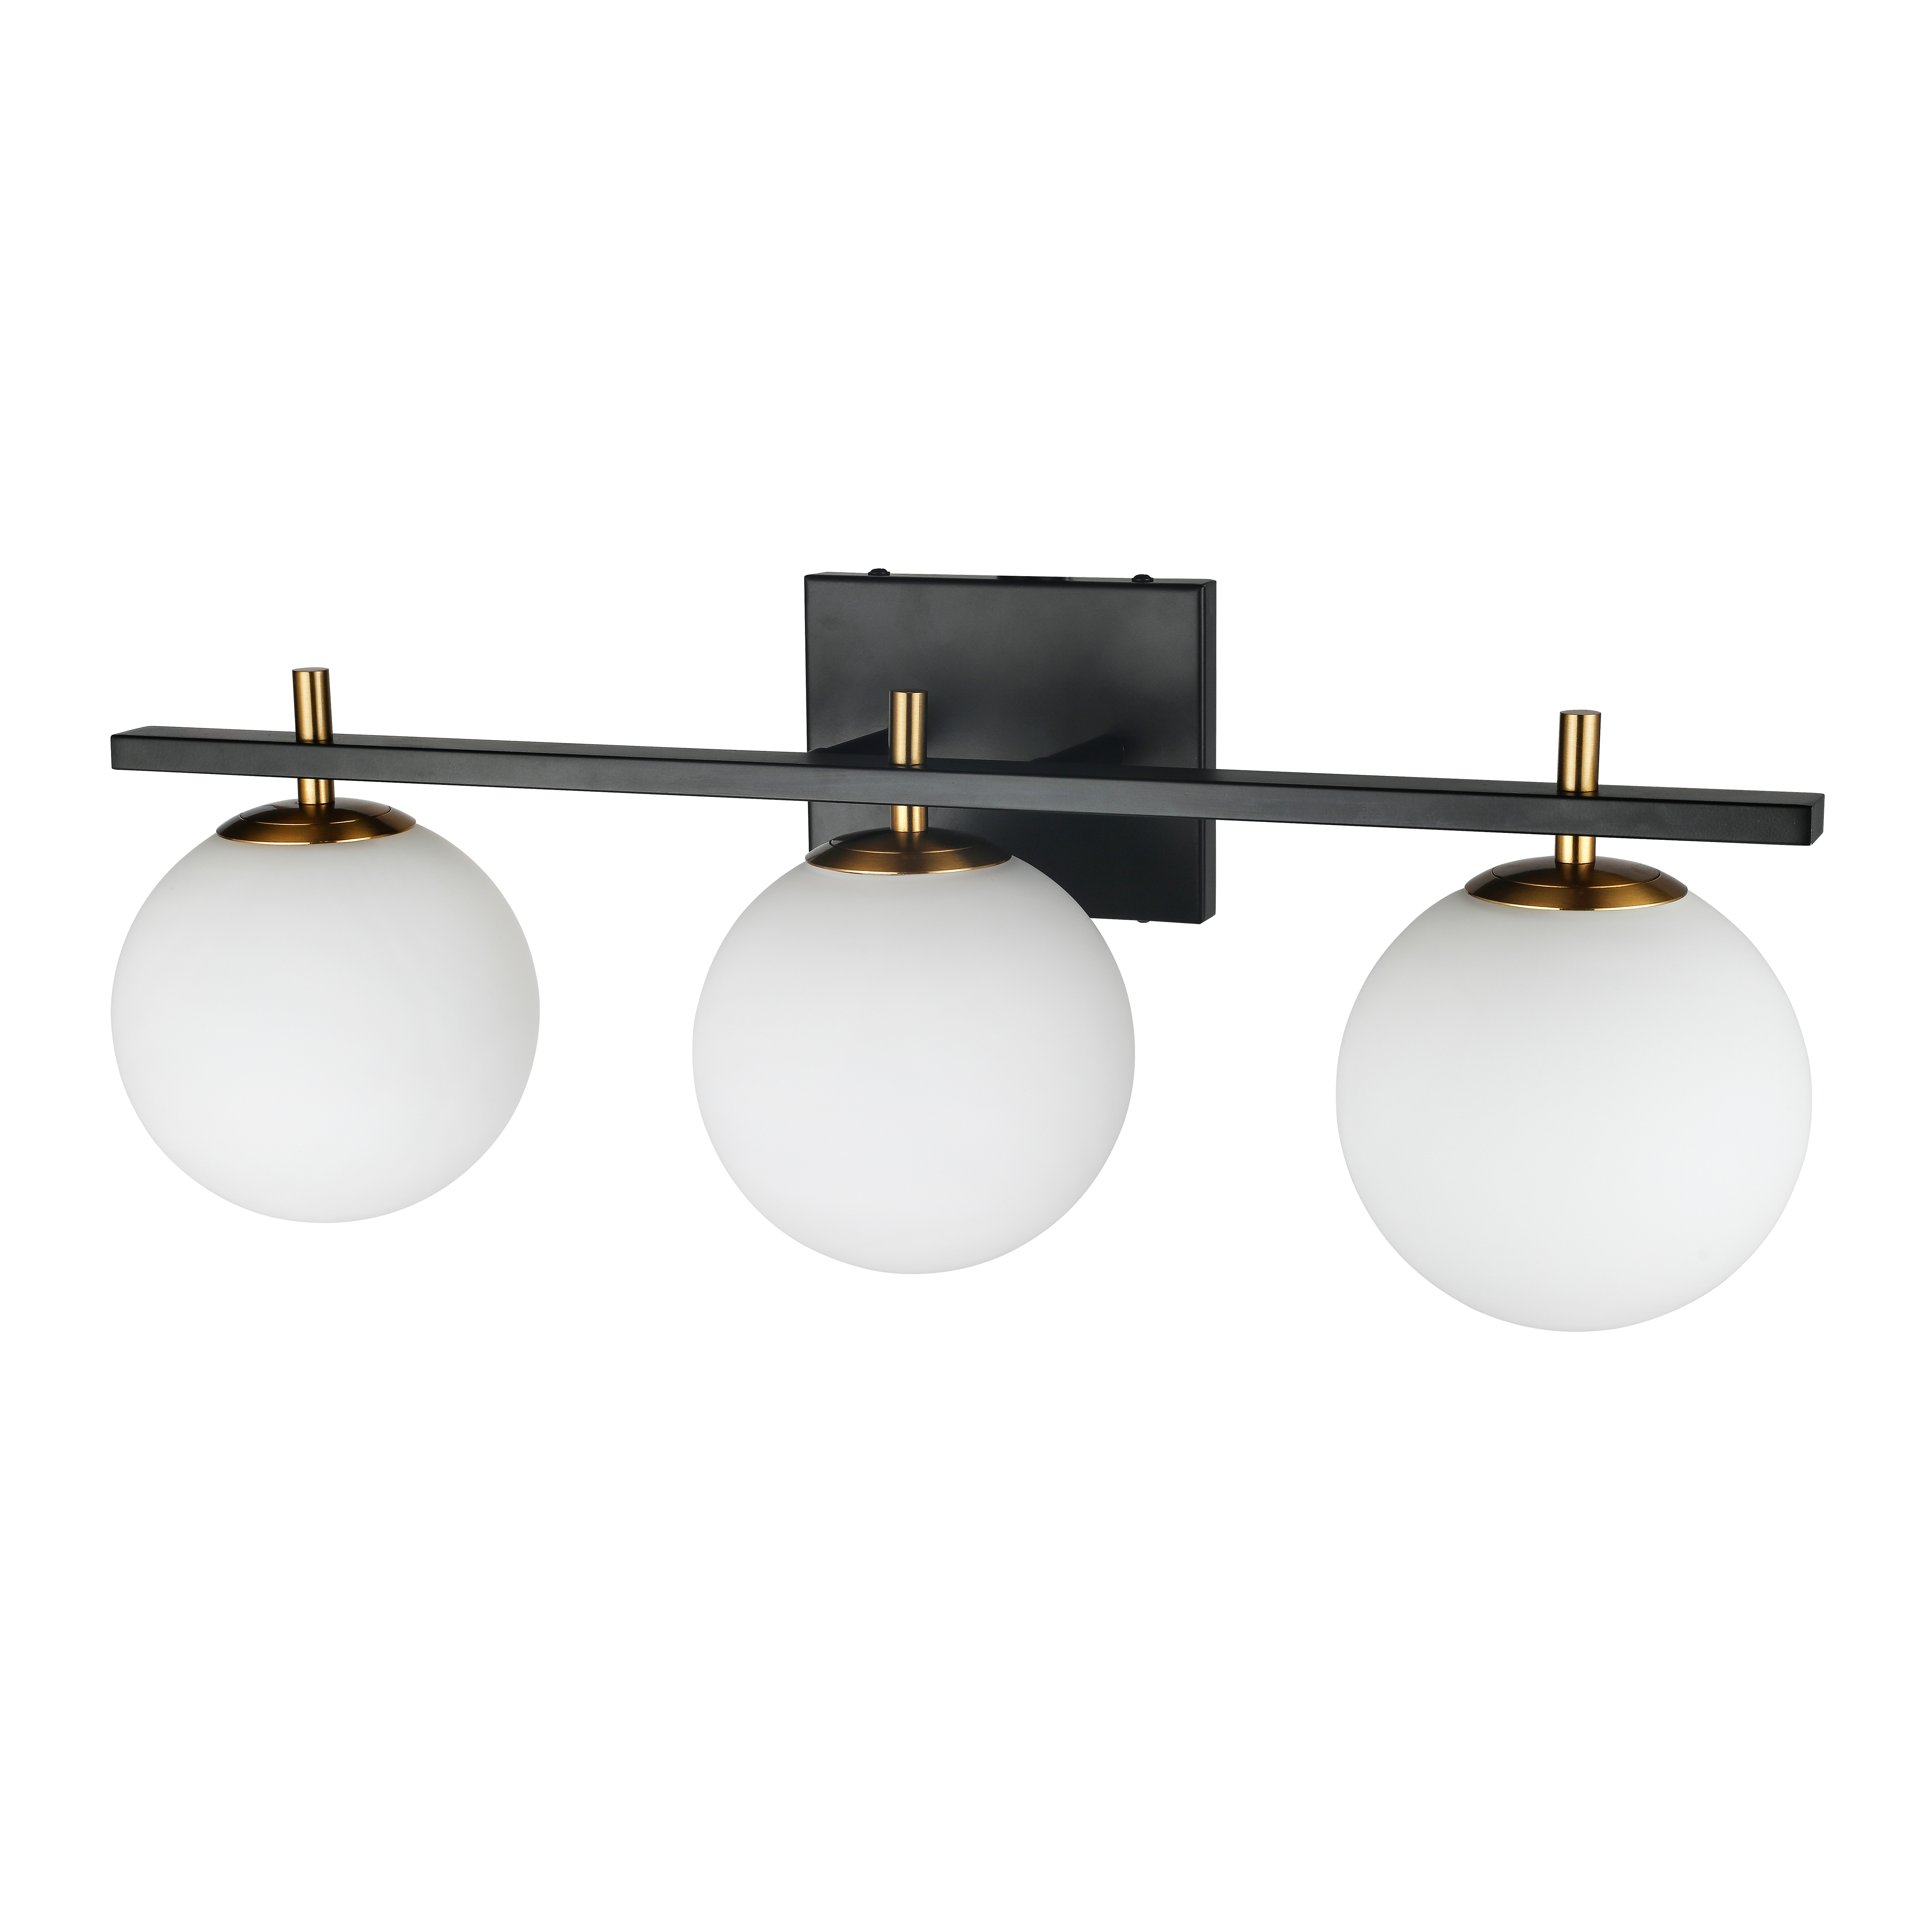 The Vivaldi family of lighting blends traditional forms with modern flair. The transitional design will enhance mid-century to modern furnishings on a note of luxury. The metal frame in a chic matte black finish extends into horizontal arms, with globe lights set below it. The combination of matte black and opal glass creates a fashionable look as it casts a warm glow of light. Vivaldi lighting will create a stylish focal point and enhance the décor in your powder room, bathroom or spa.